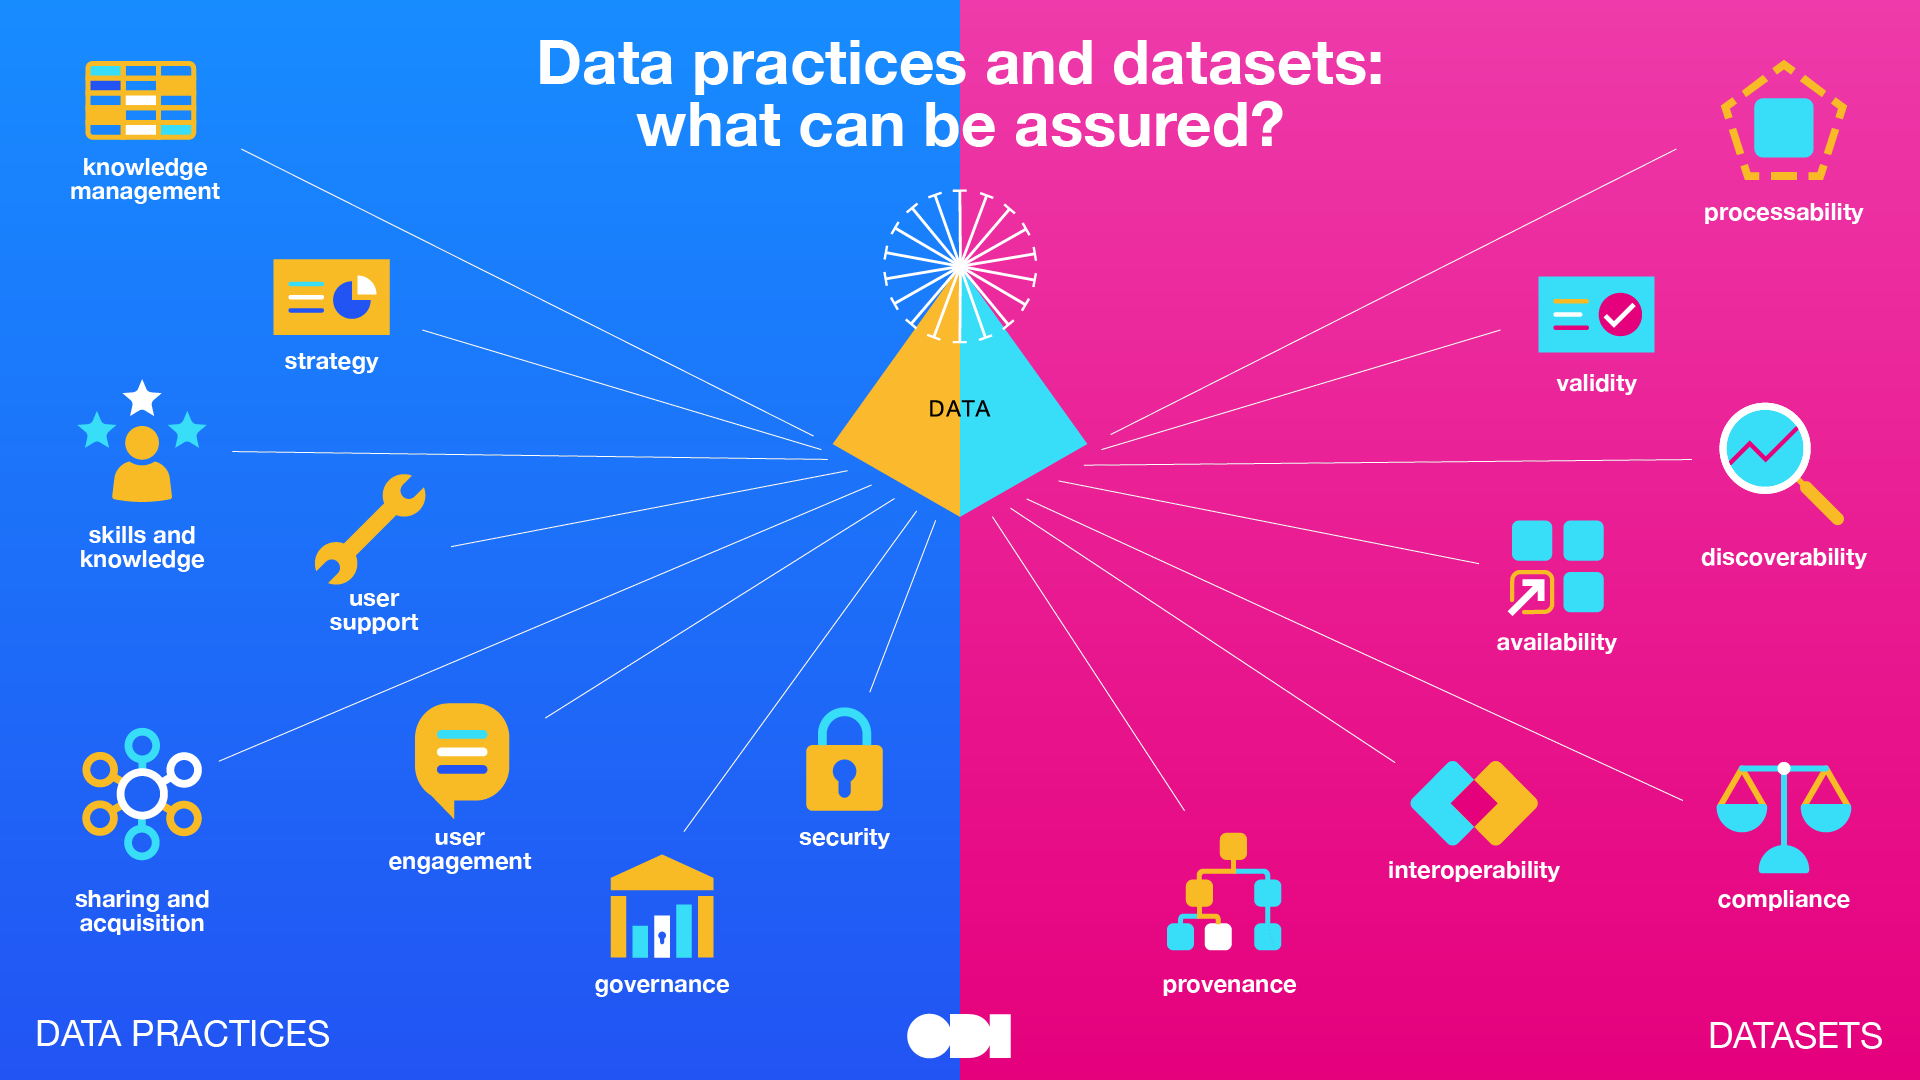 Data practices and datasets: what can be assured. Data practices: knowledge management; strategy; skills and knowledge; user support; sharing and acquisition; user engagement; governance; security. Dataset: process-ability; validity; discoverability; avai